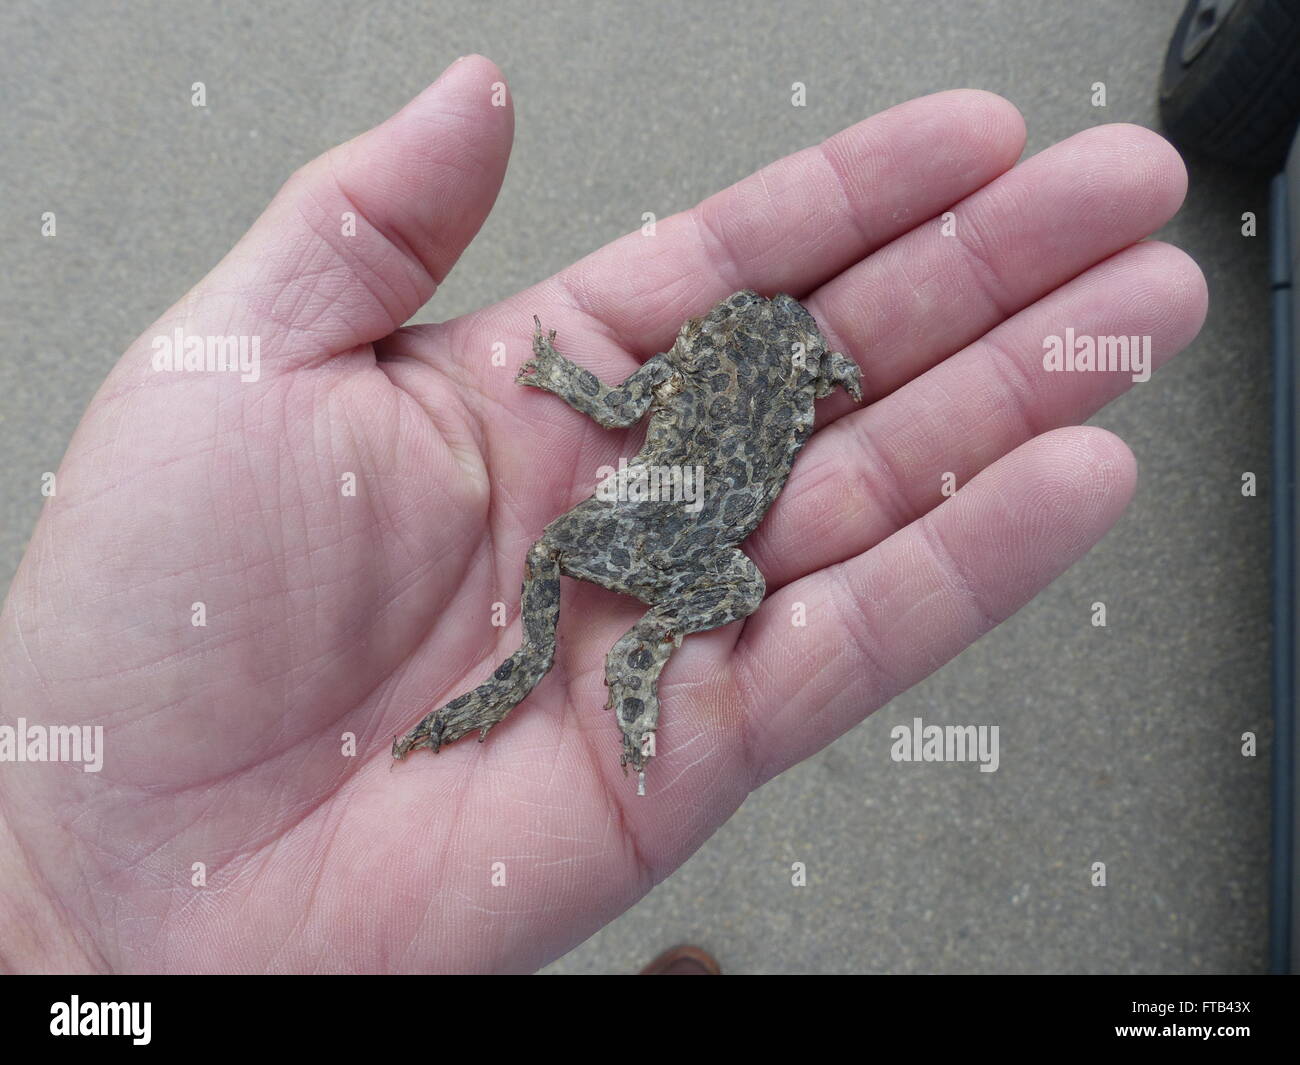 Czech Republic - Poldovka. Man holds road killed toad in his palm. Toad is a protected species. Stock Photo